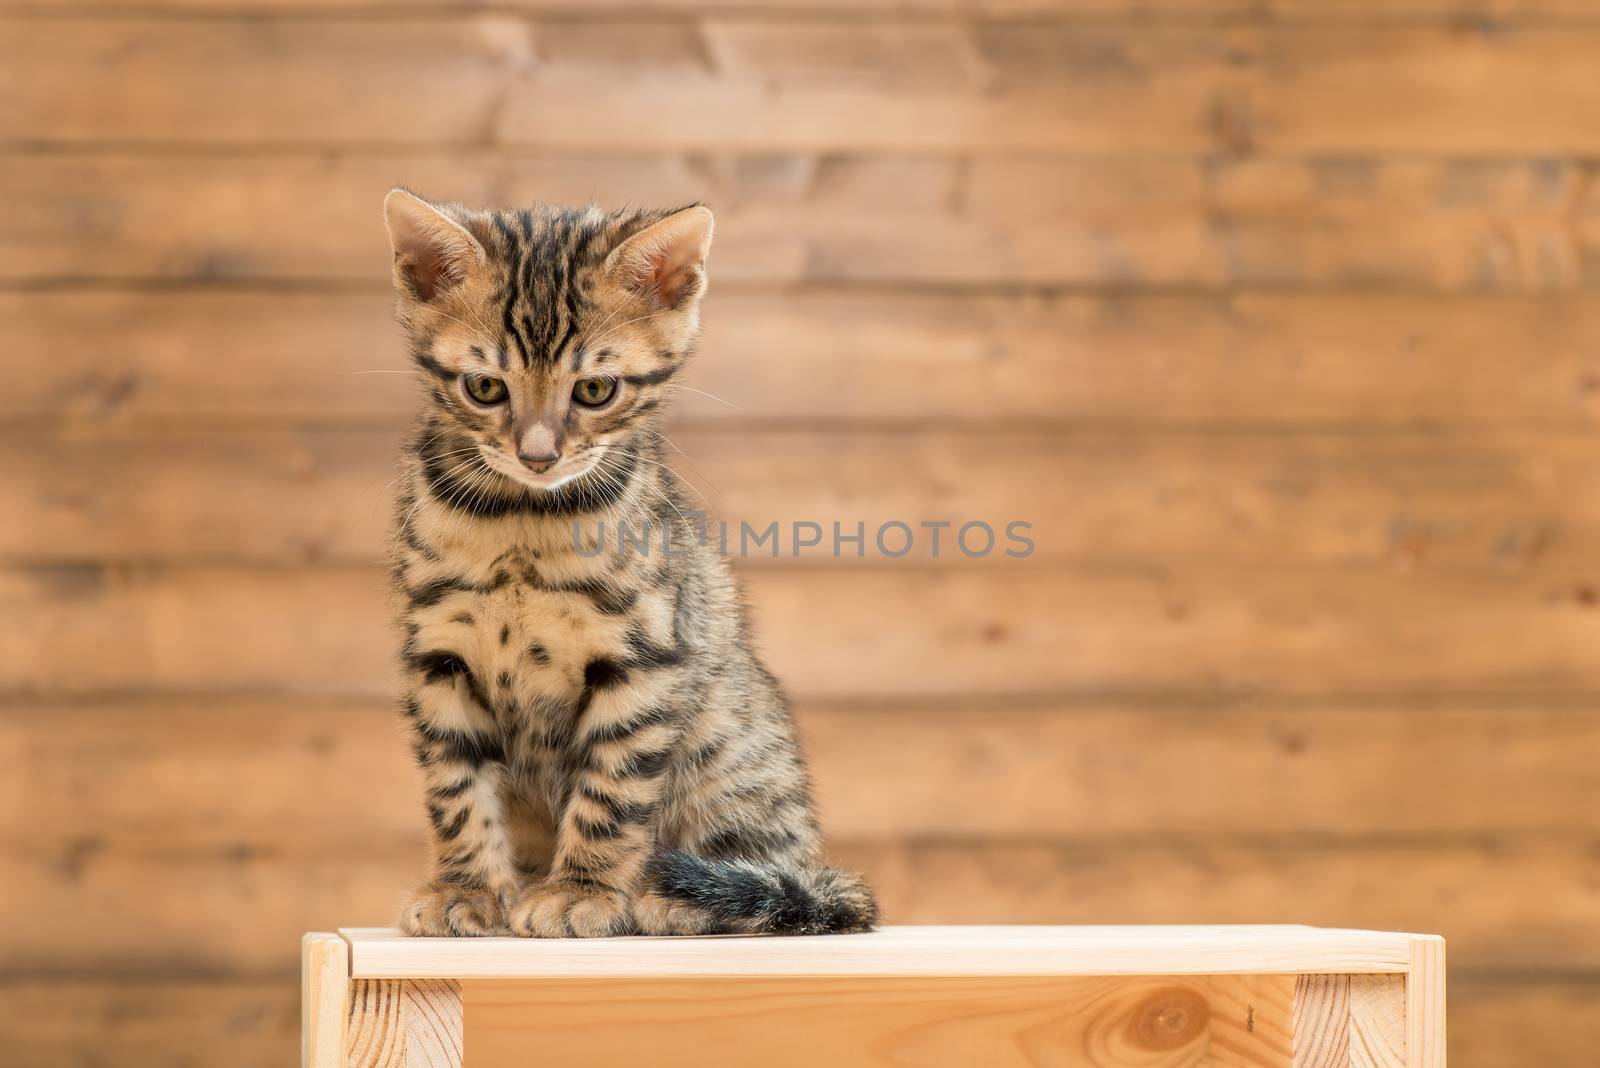 beautiful little bengal kitten looking down while sitting on a w by kosmsos111